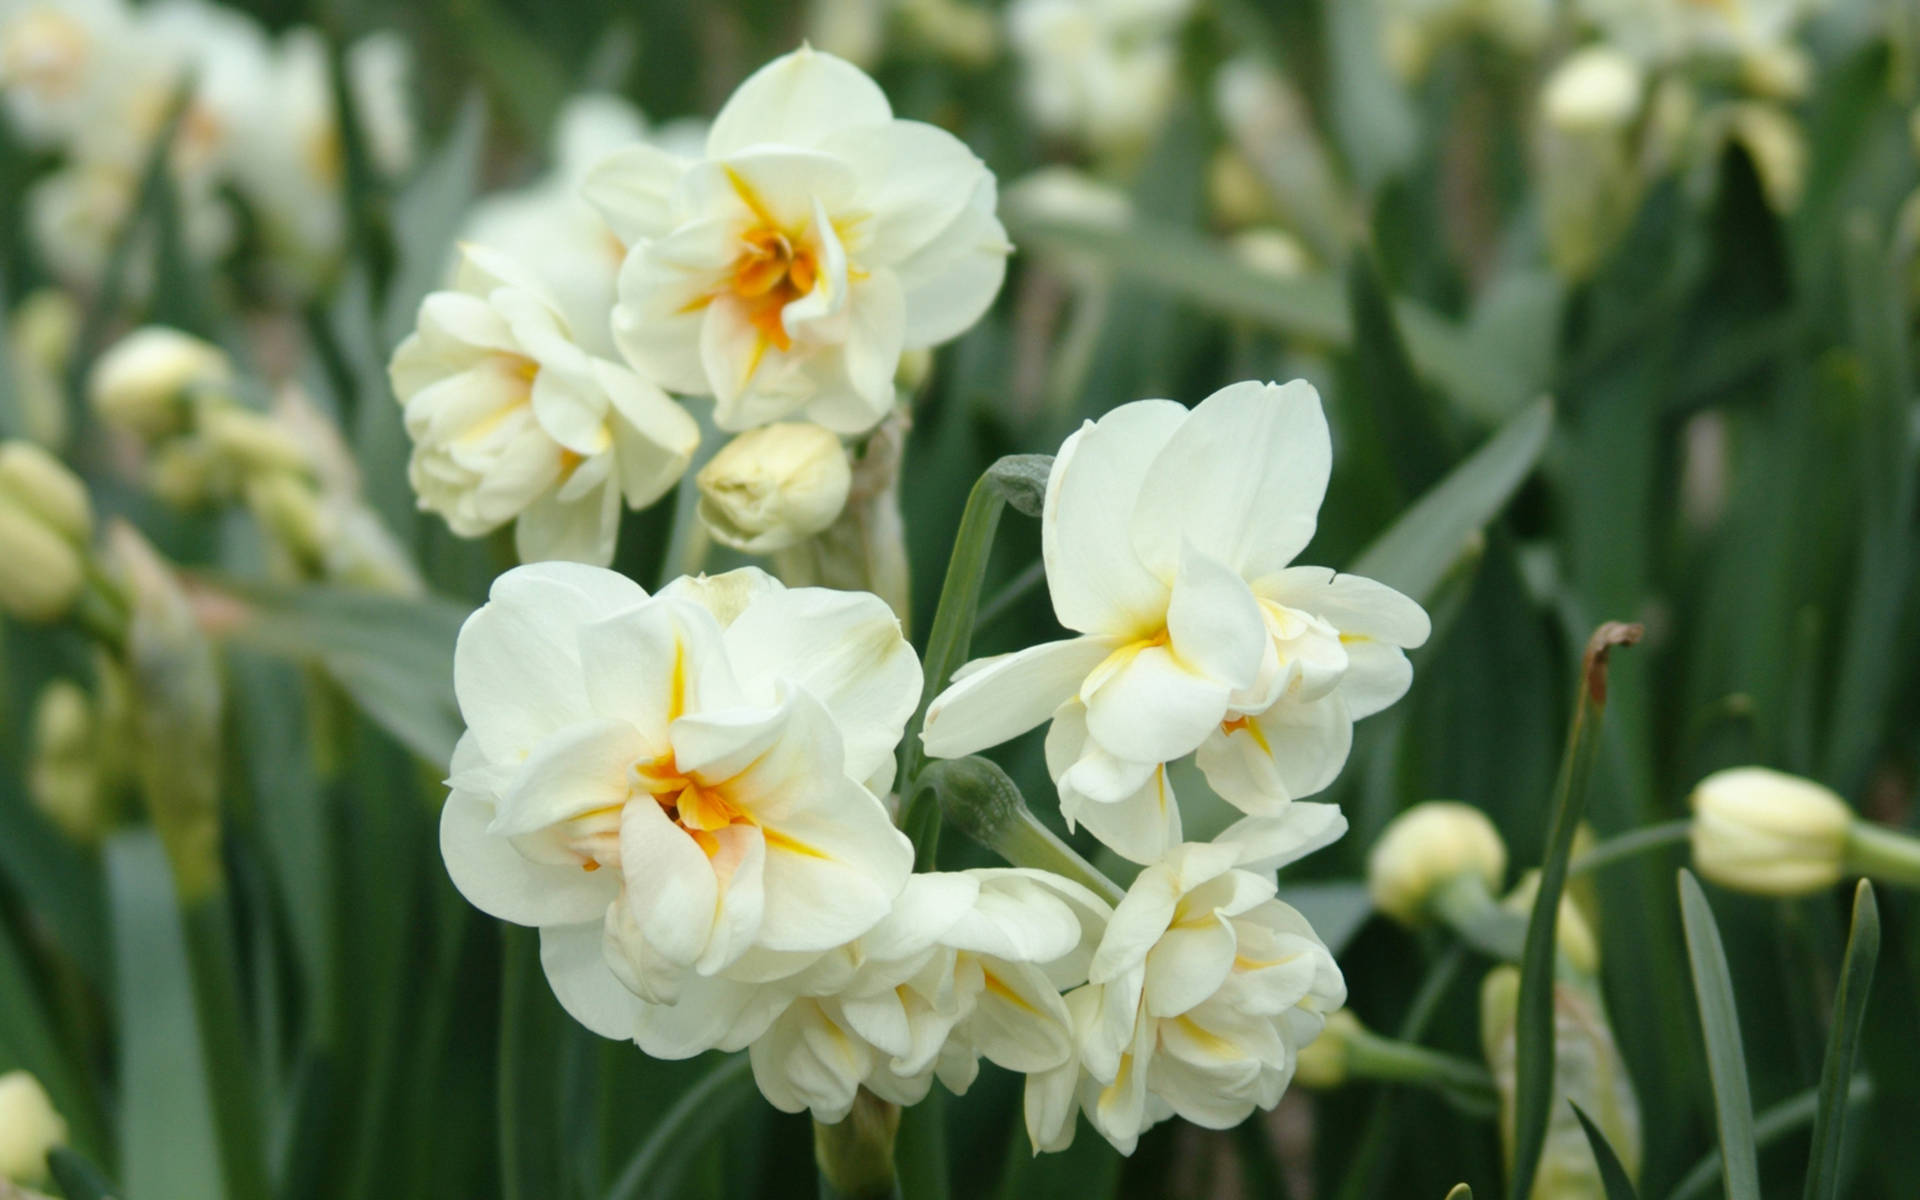 Caption: Majestic View of Sir Winston Churchill Narcissus Flowers Wallpaper